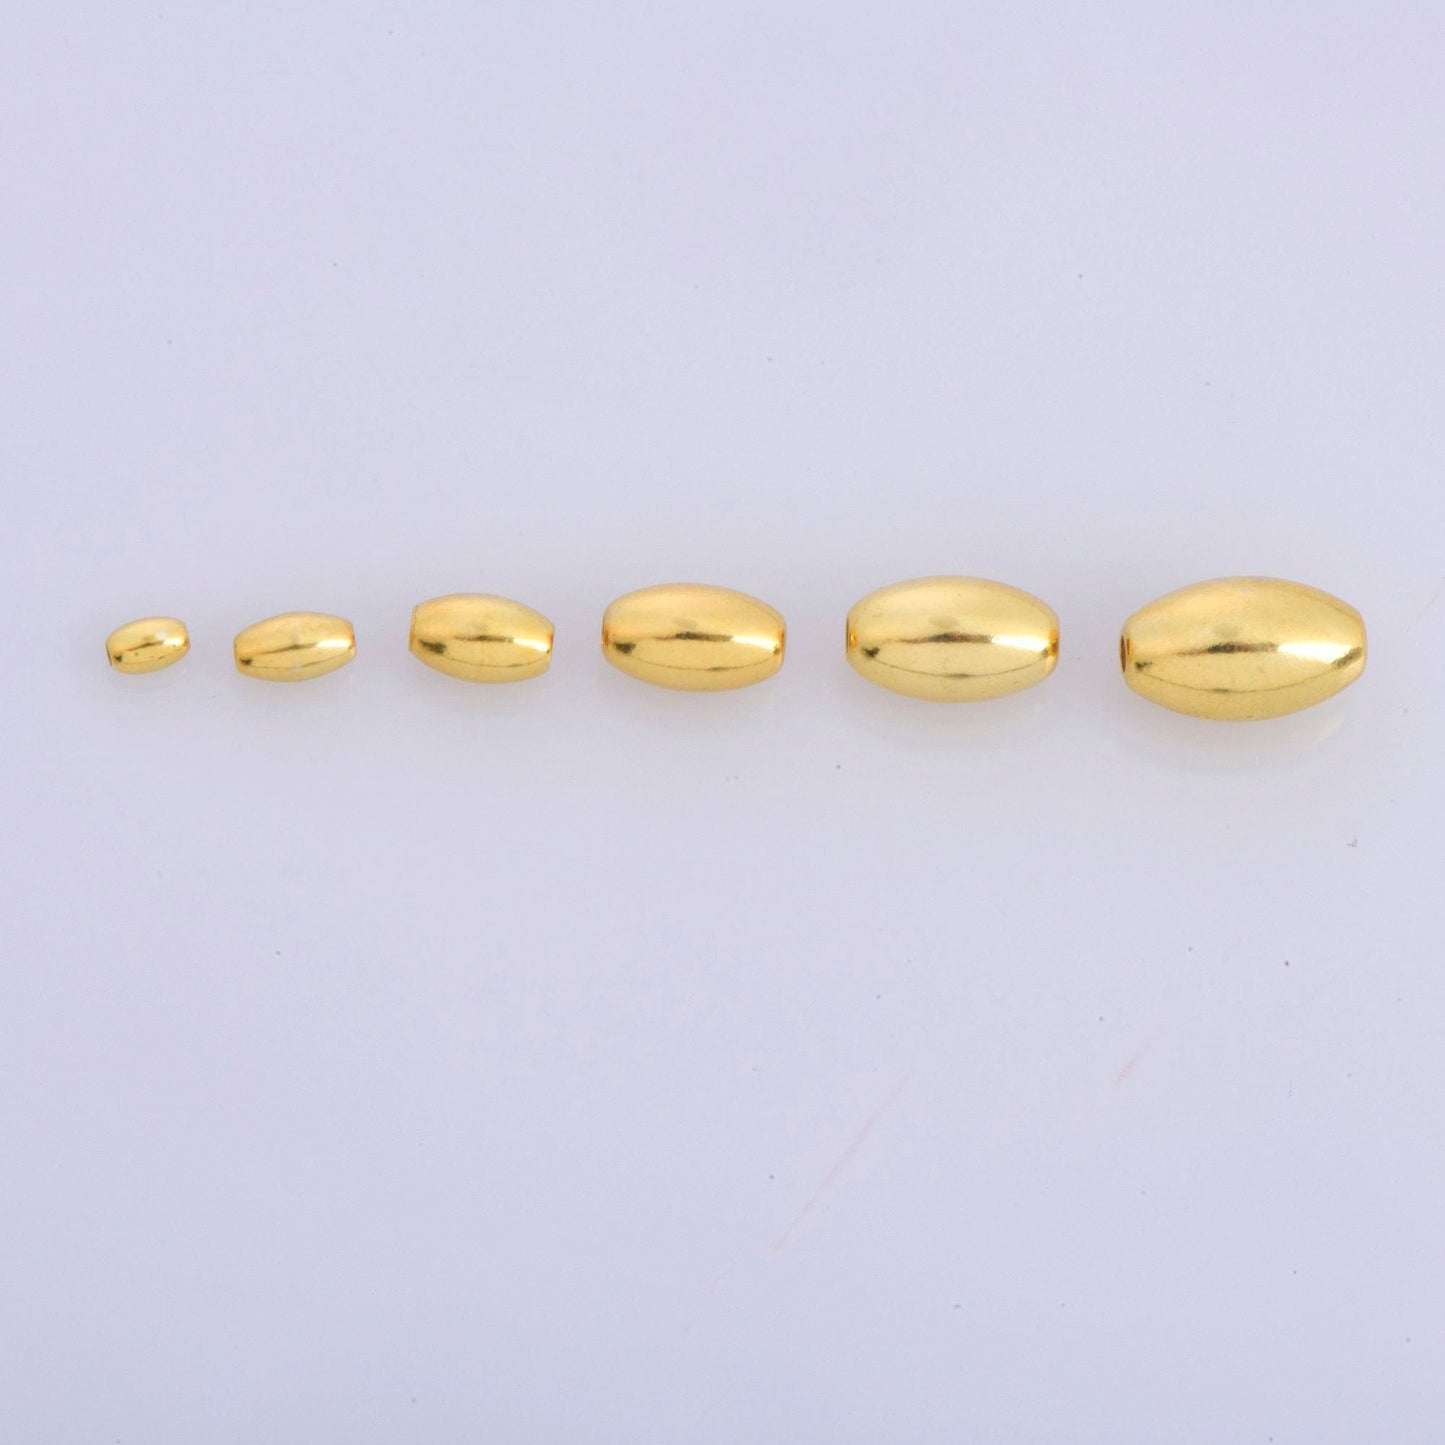 925 Silver Oval Beads in 24K Gold Vermeil, 18K Gold Plated Rice Shape Beads, Smooth Seamless Olive Beads, Jewelry Supplies, VM1/M1 A-F